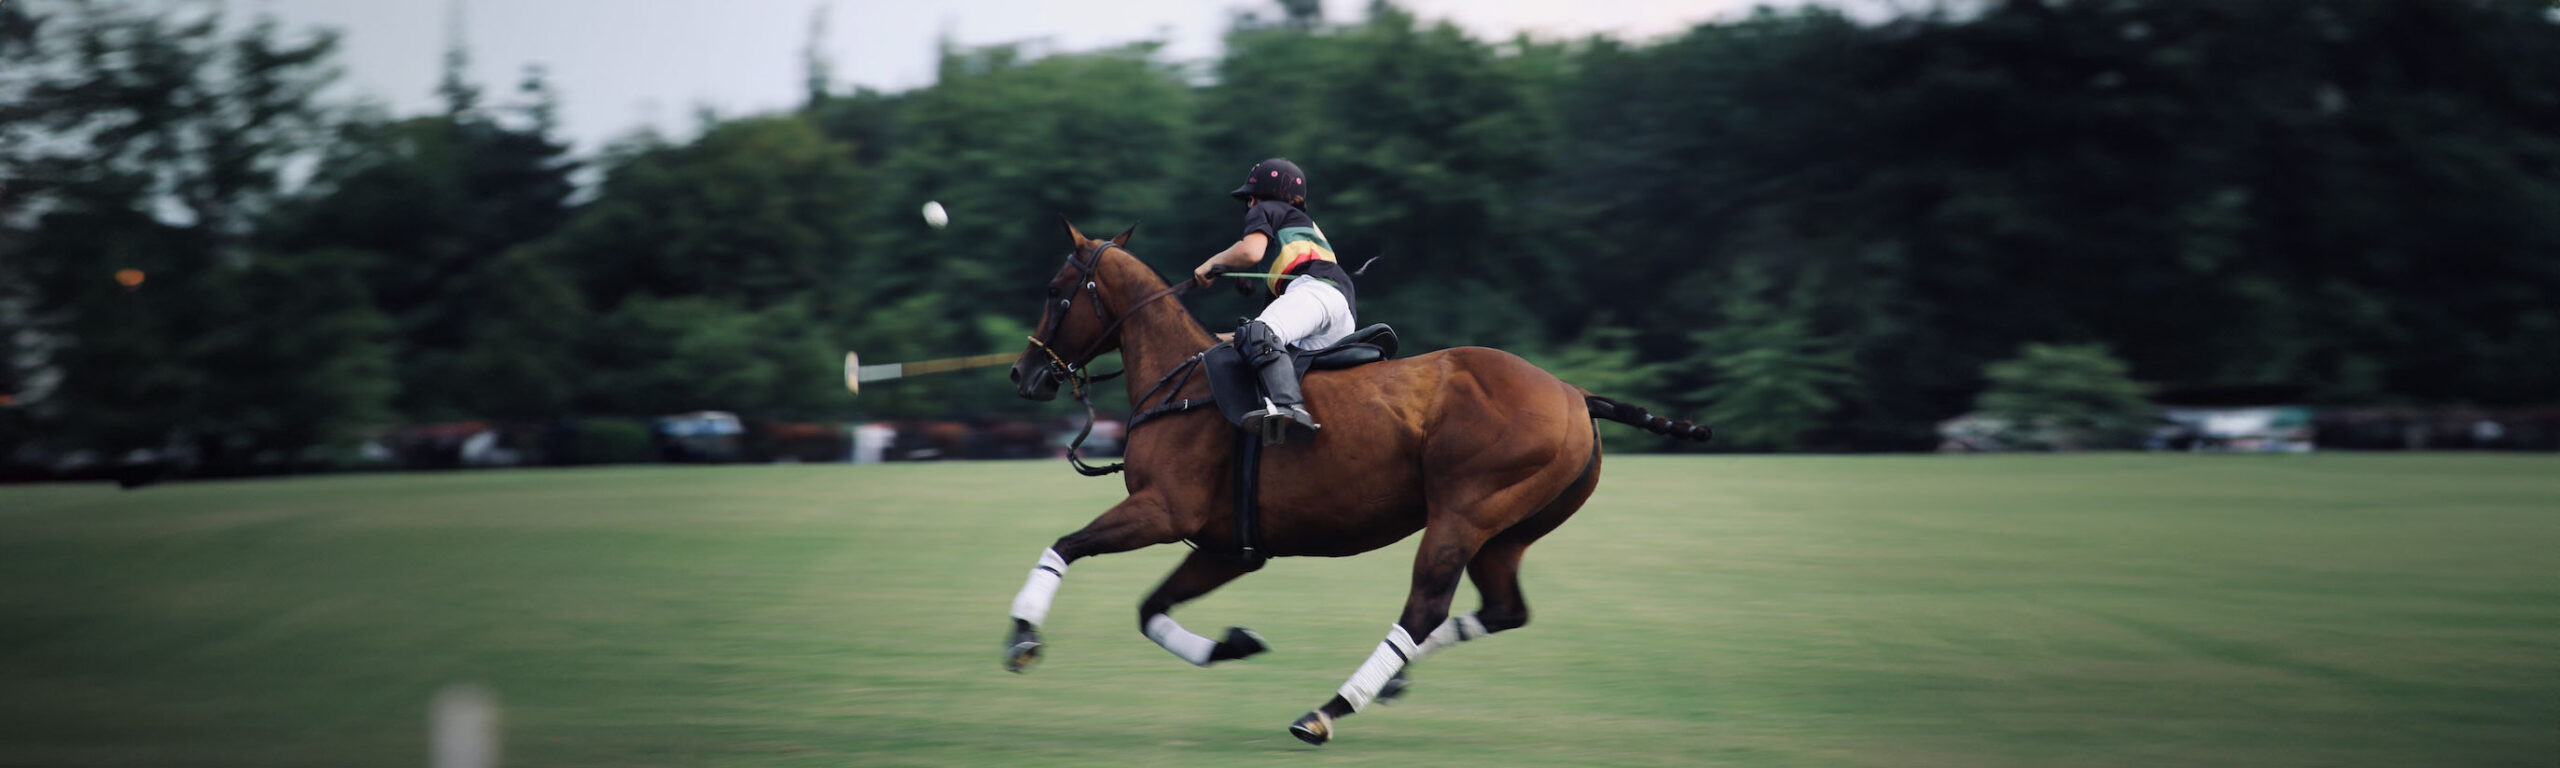 A polo player on a horse.